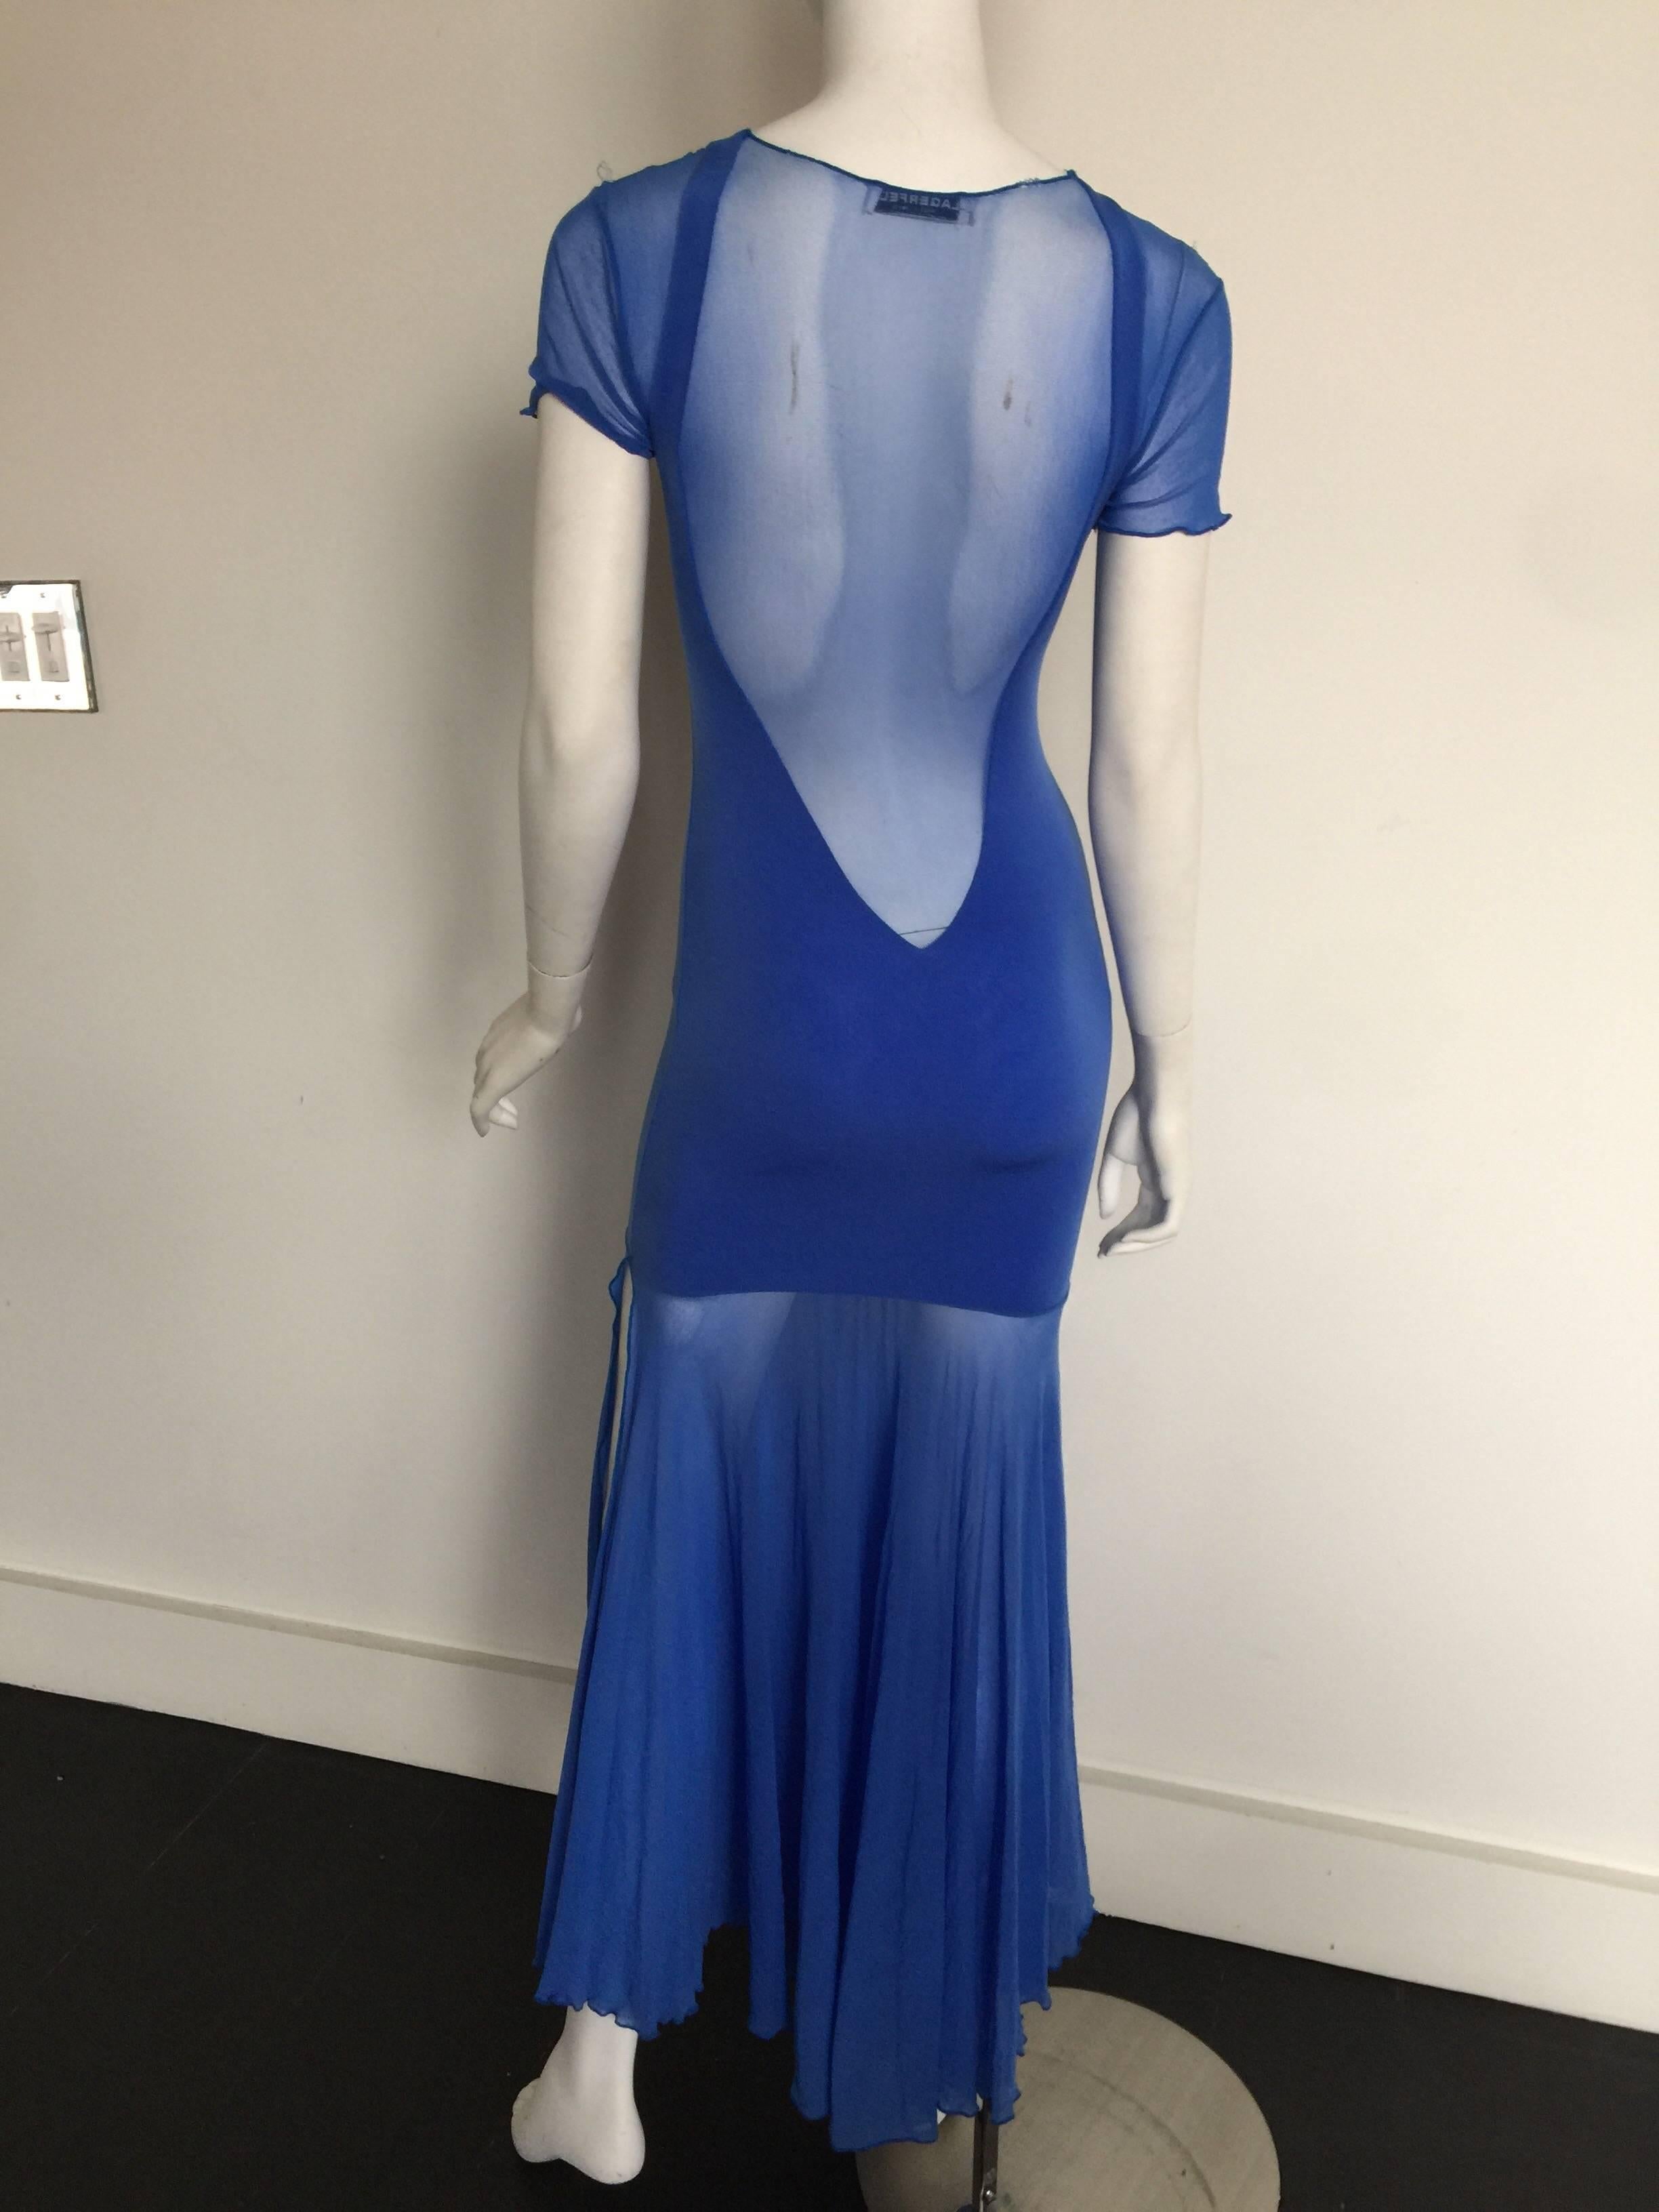 Karl Lagerfeld royal blue mesh form fittings dress In Good Condition For Sale In New York, NY